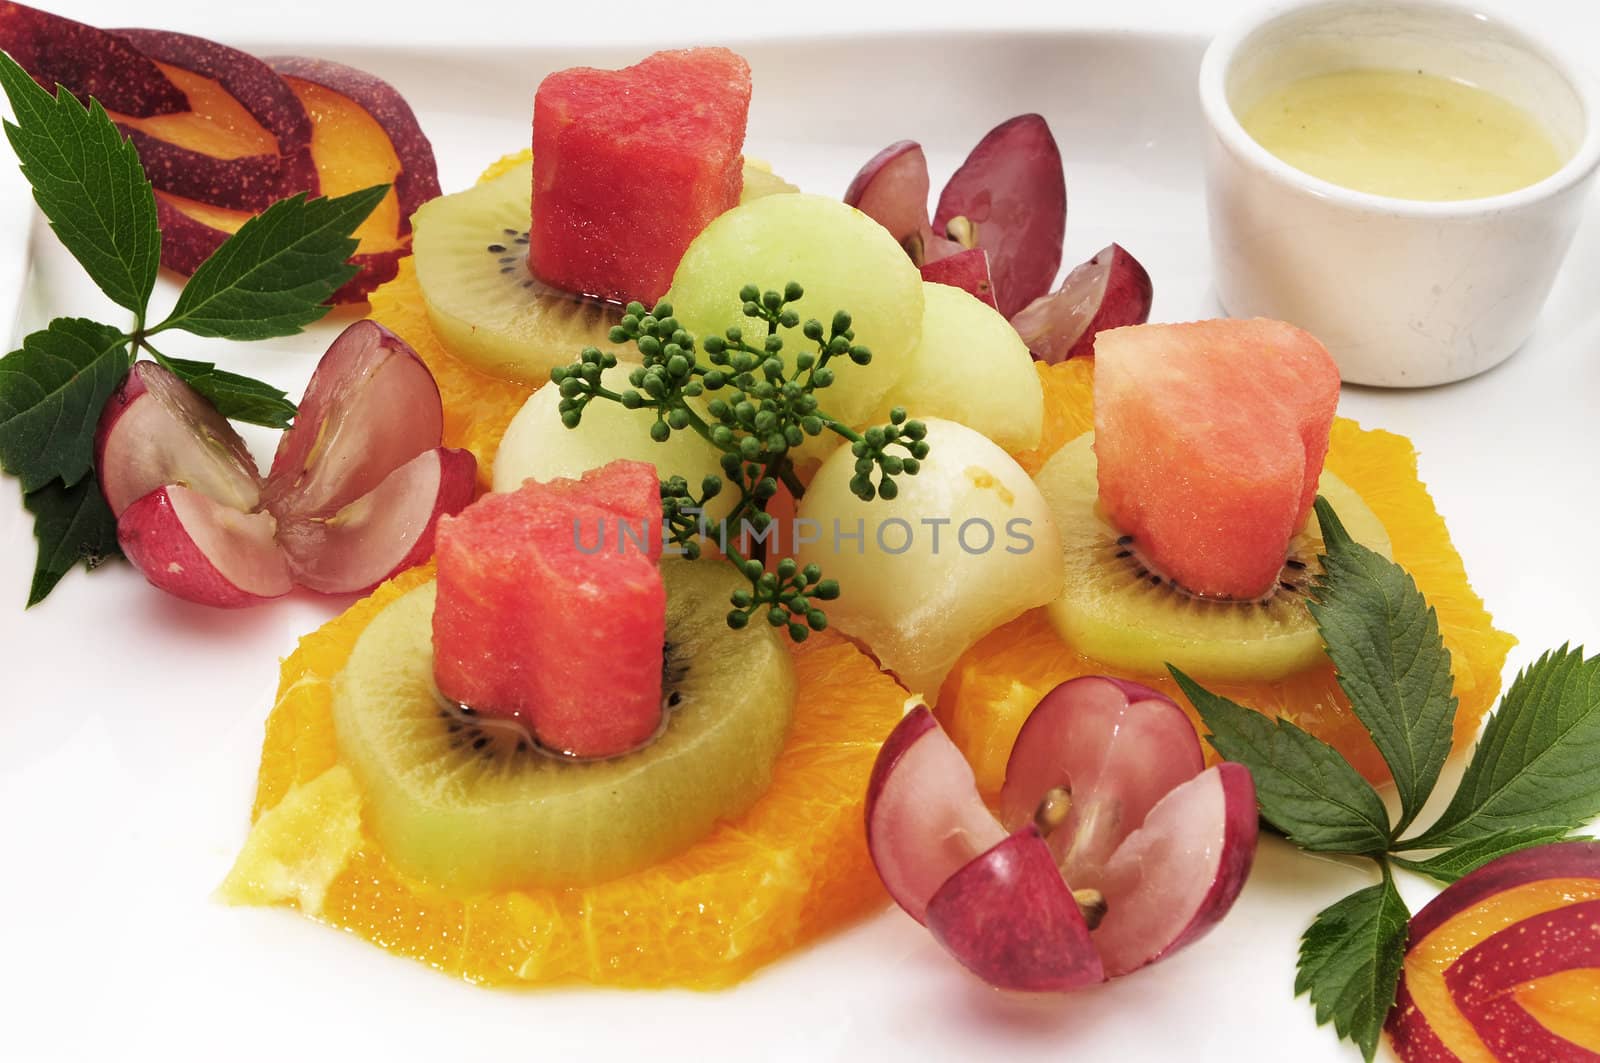 Nice healthful, fresh fruits composition on the plate